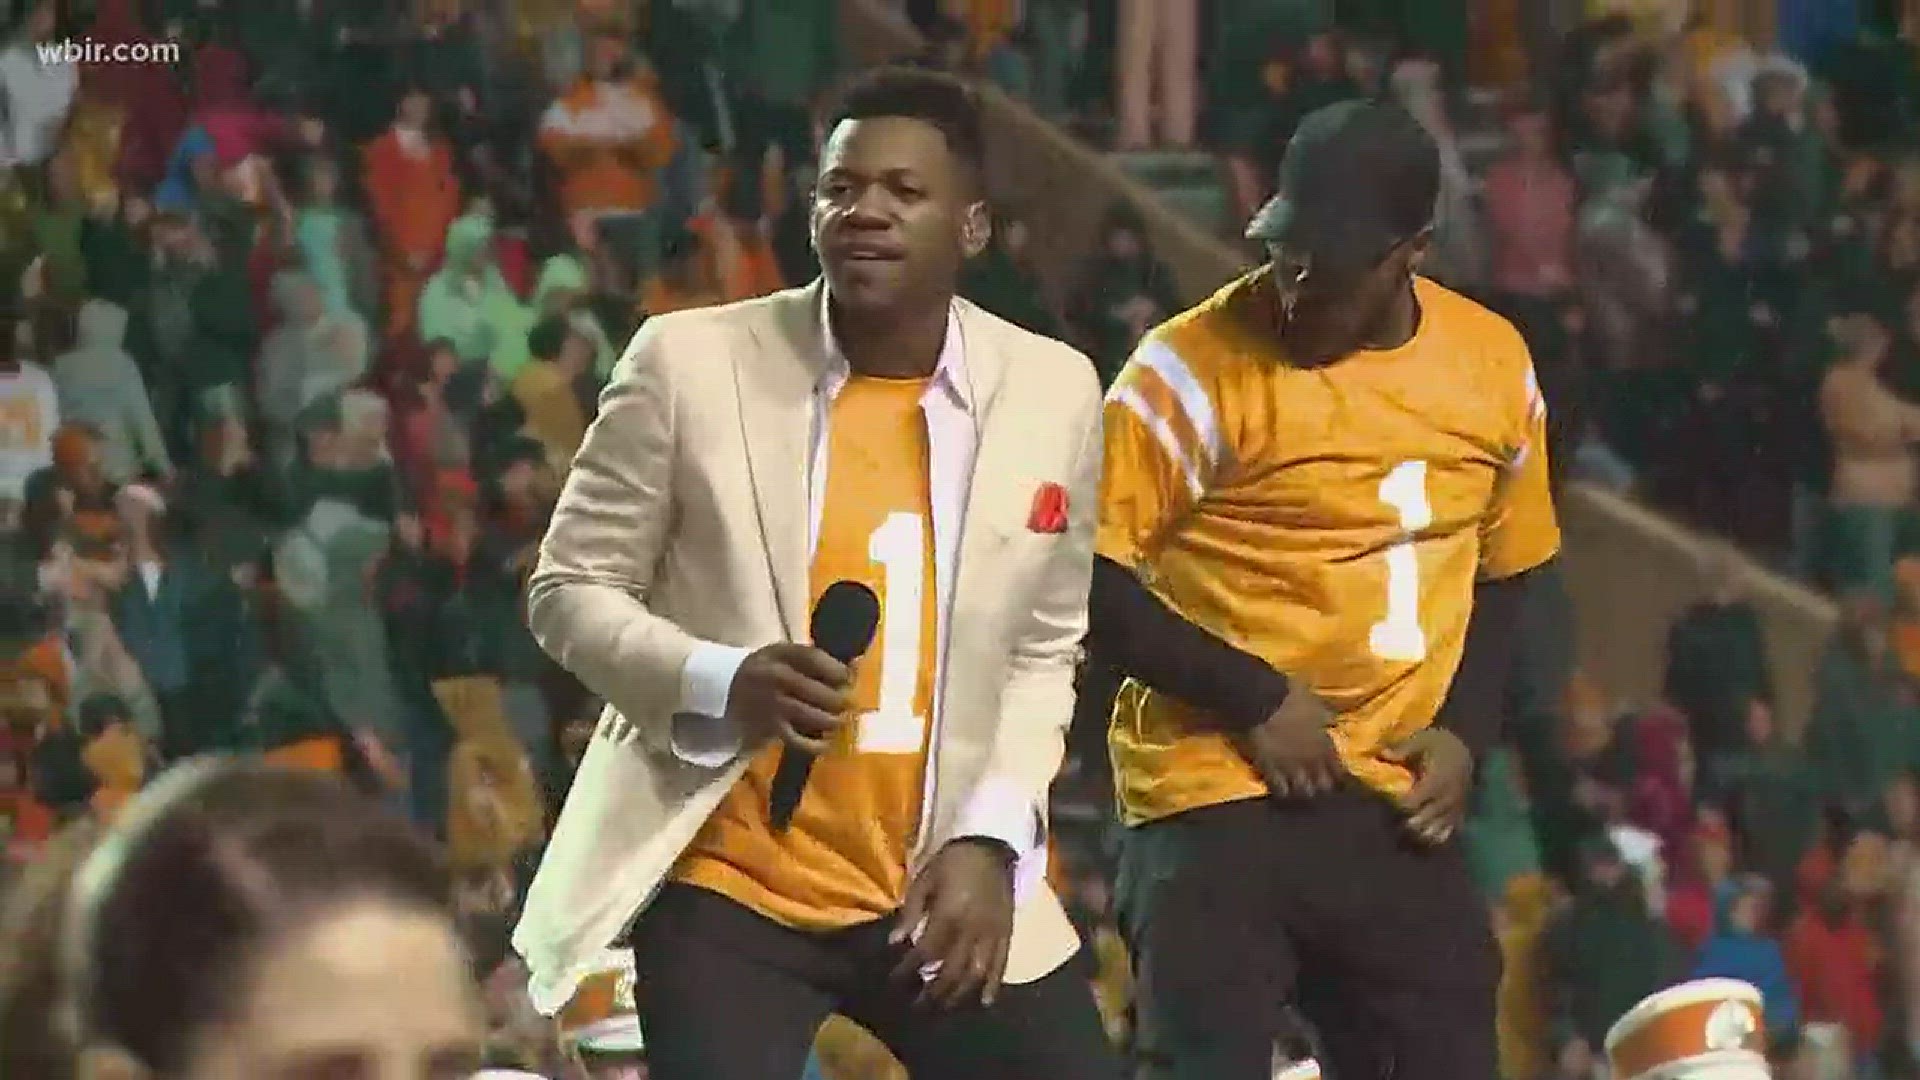 Chris Blue performed with Pride of the Southland during the halftime show.